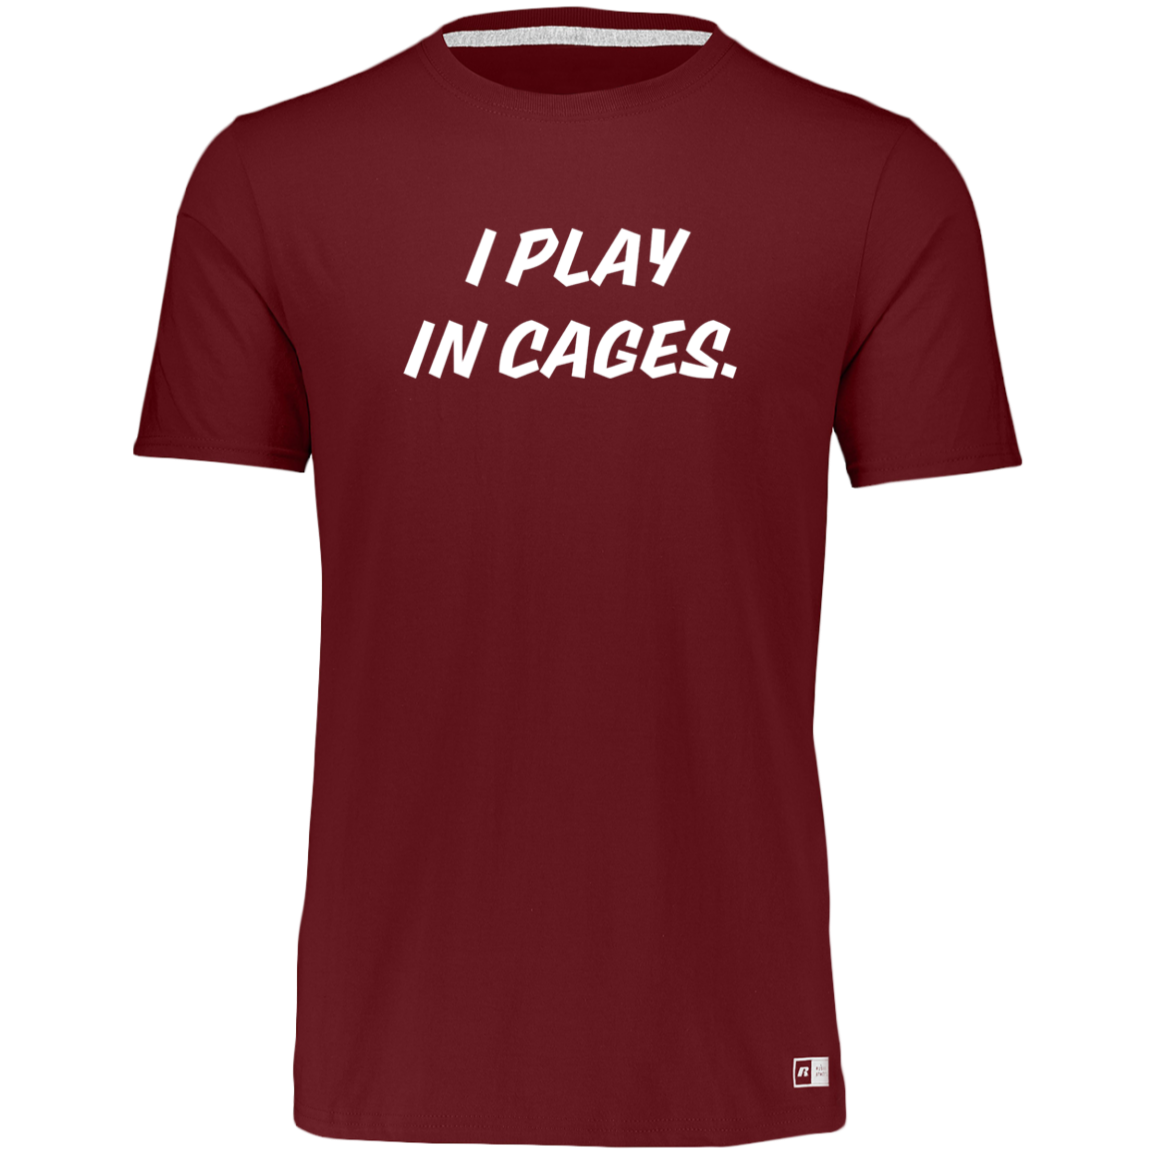 In Cages Dri-Power Tee